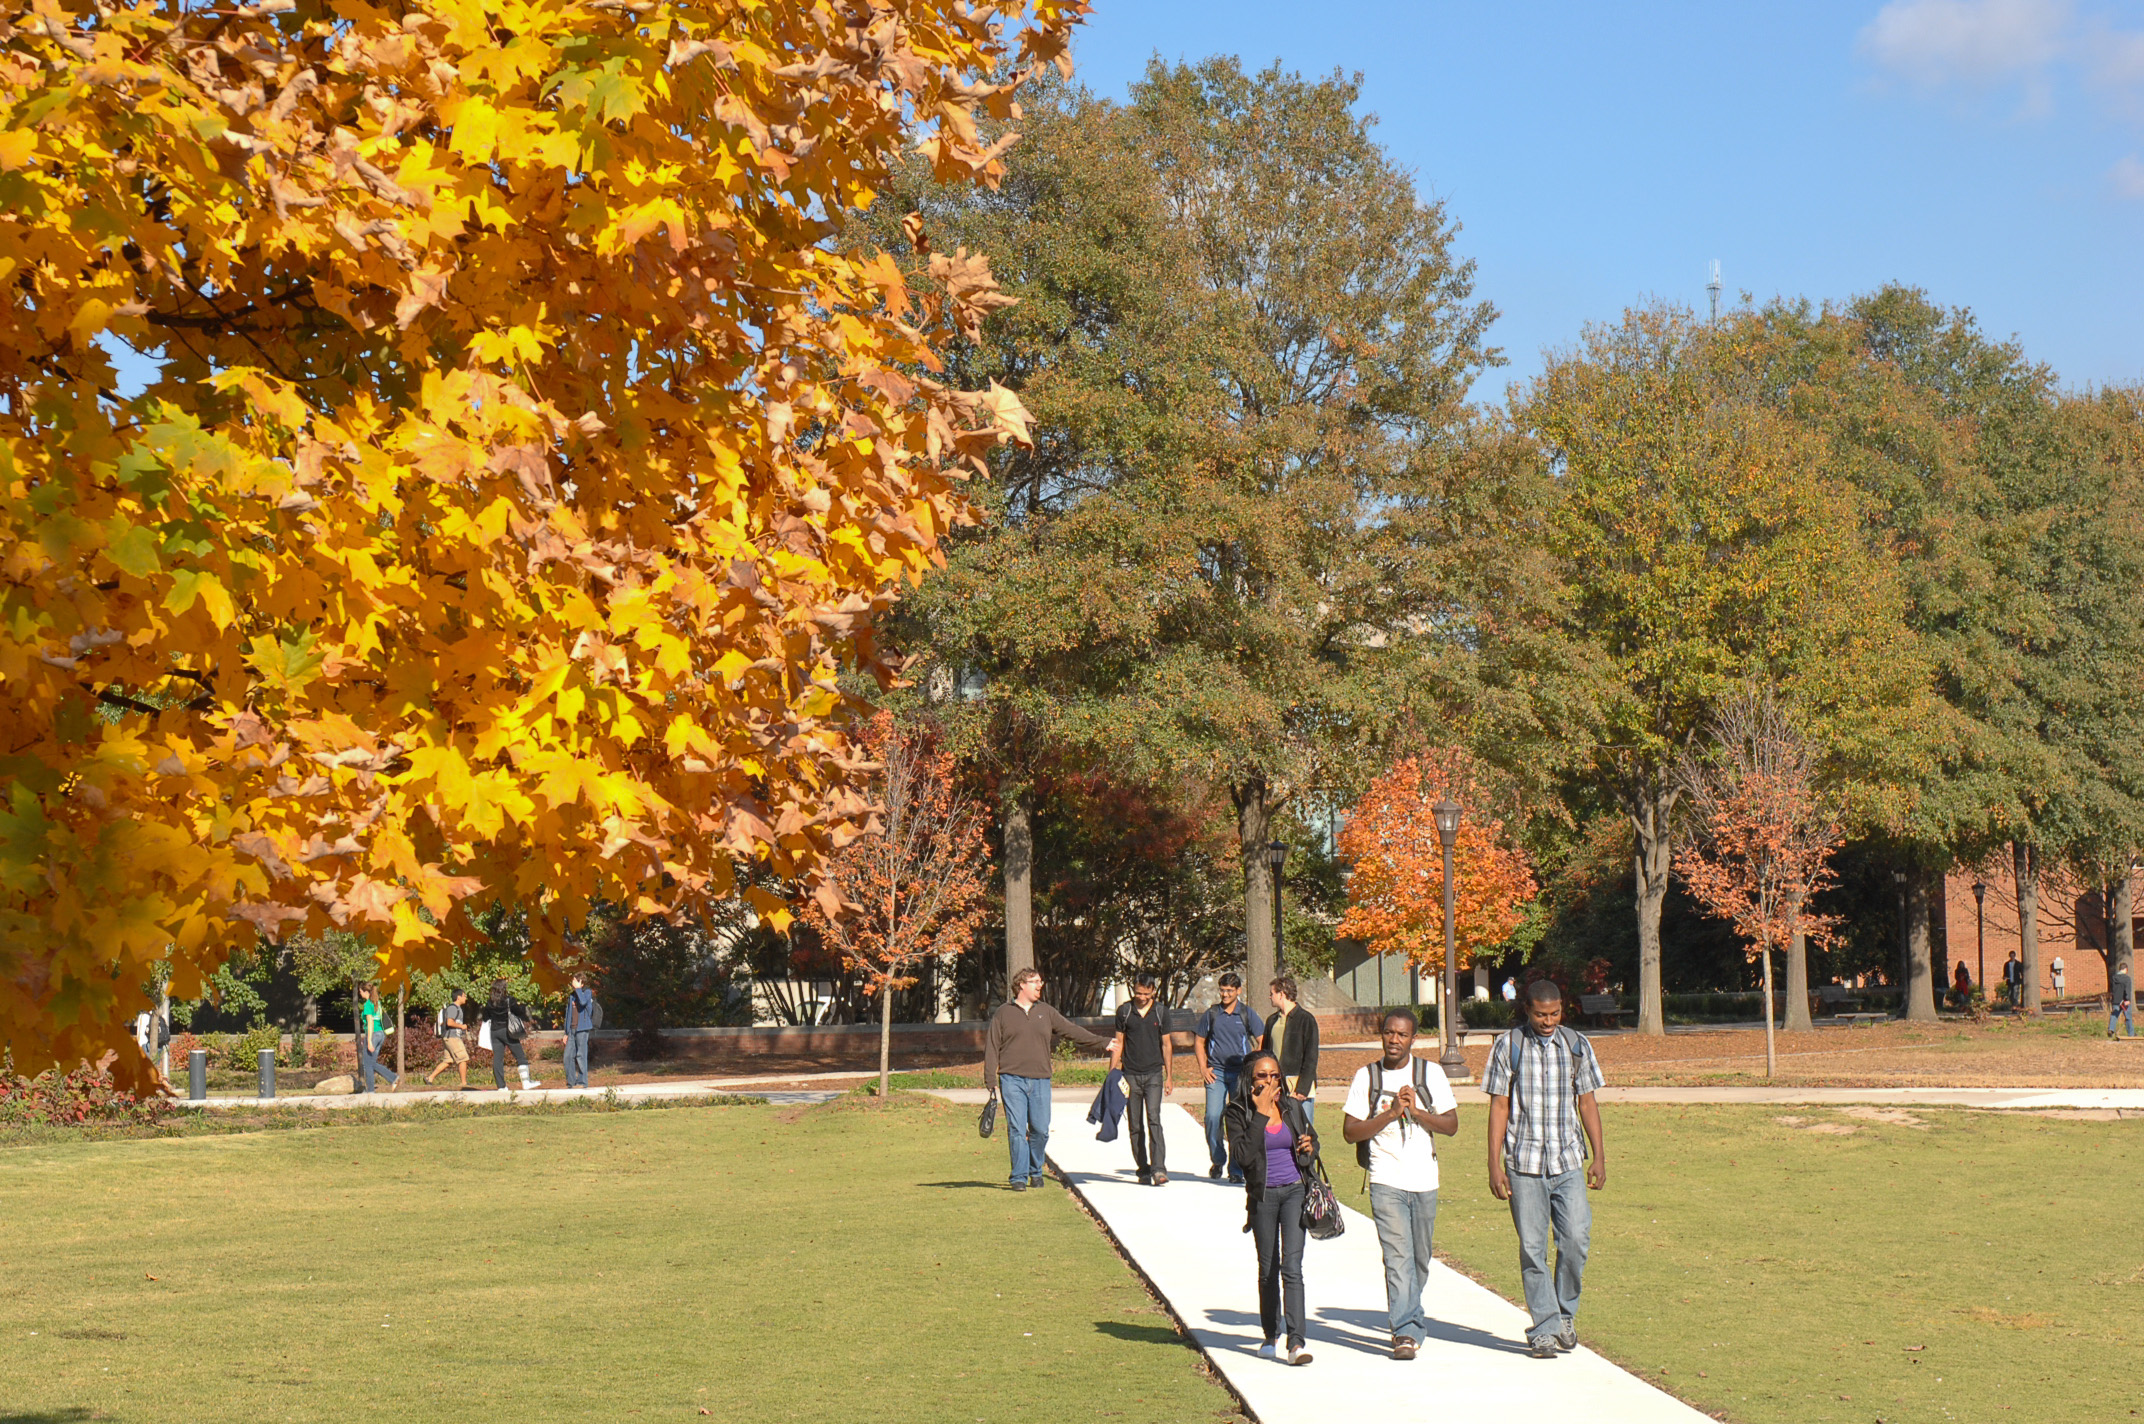 Georgia Tech was one of the first universities to receive the Arbor Day Foundation's Tree Campus USA certification.